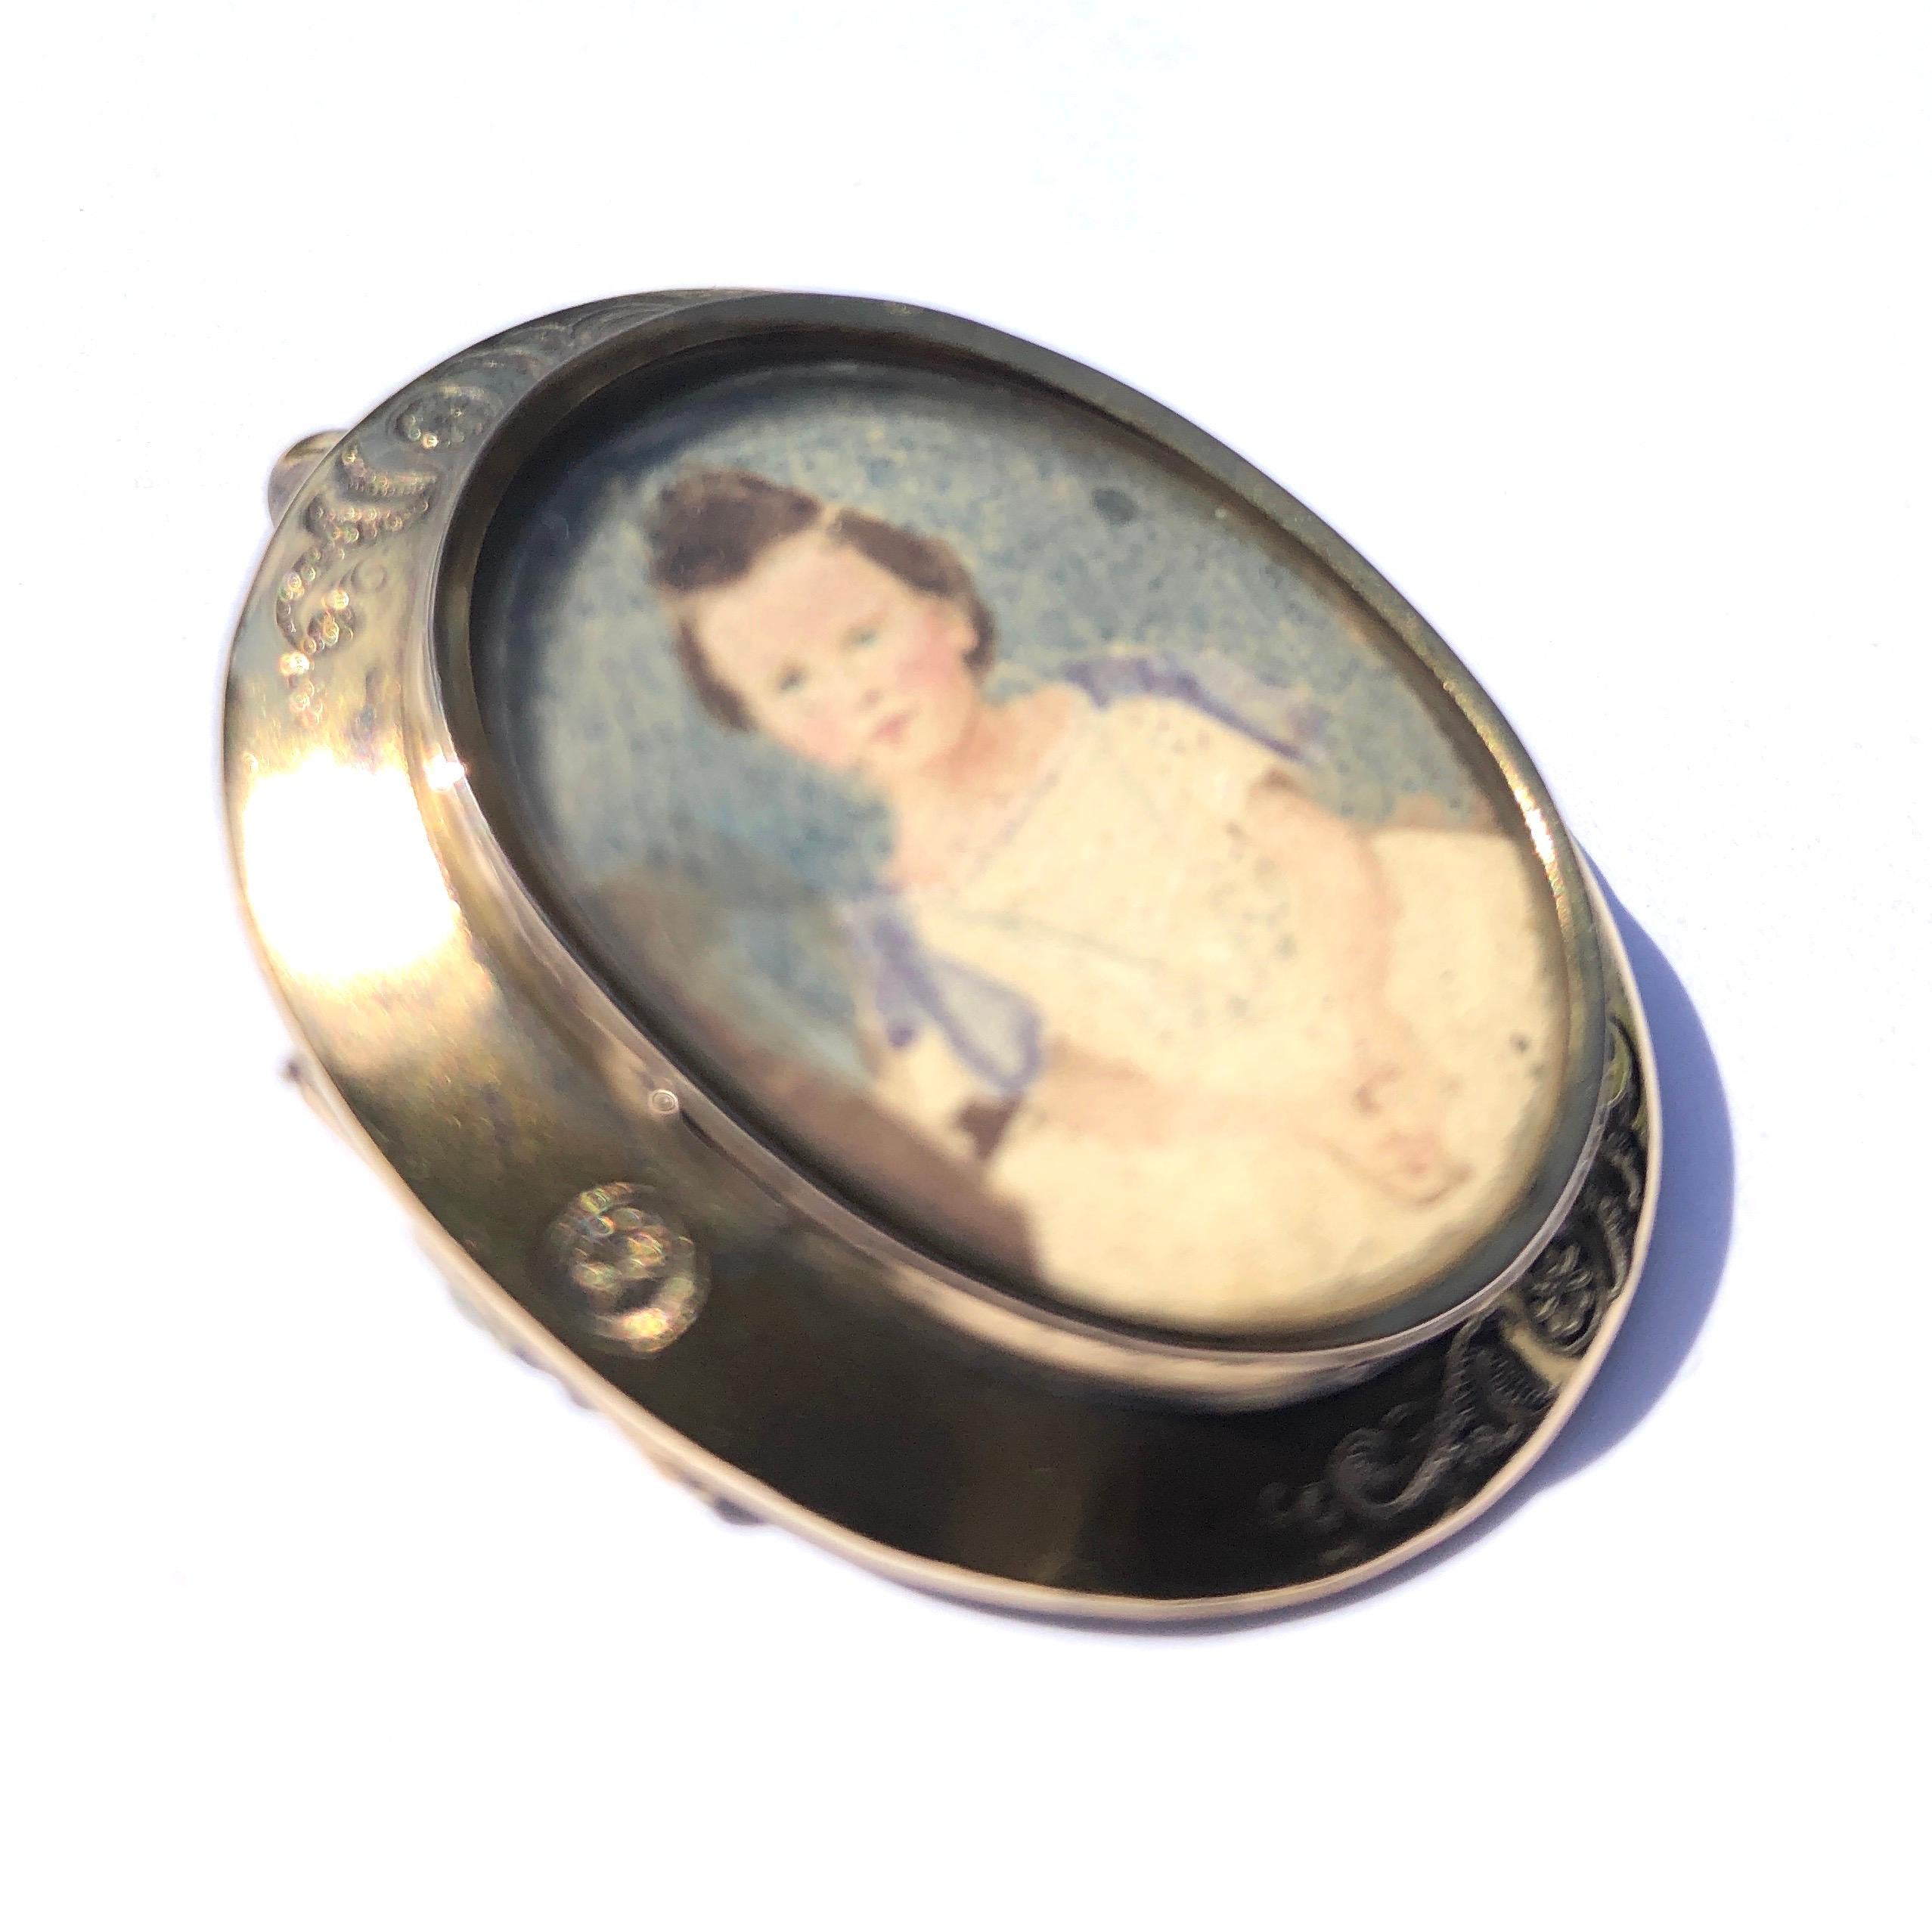 This gorgeous piece has fine intricate flower and swirl engraving and holds a picture of a lovely little girl smartly dressed in her finery. This could be either a pendant or a brooch.

Dimensions: 37x32mm

Weight: 9.49g